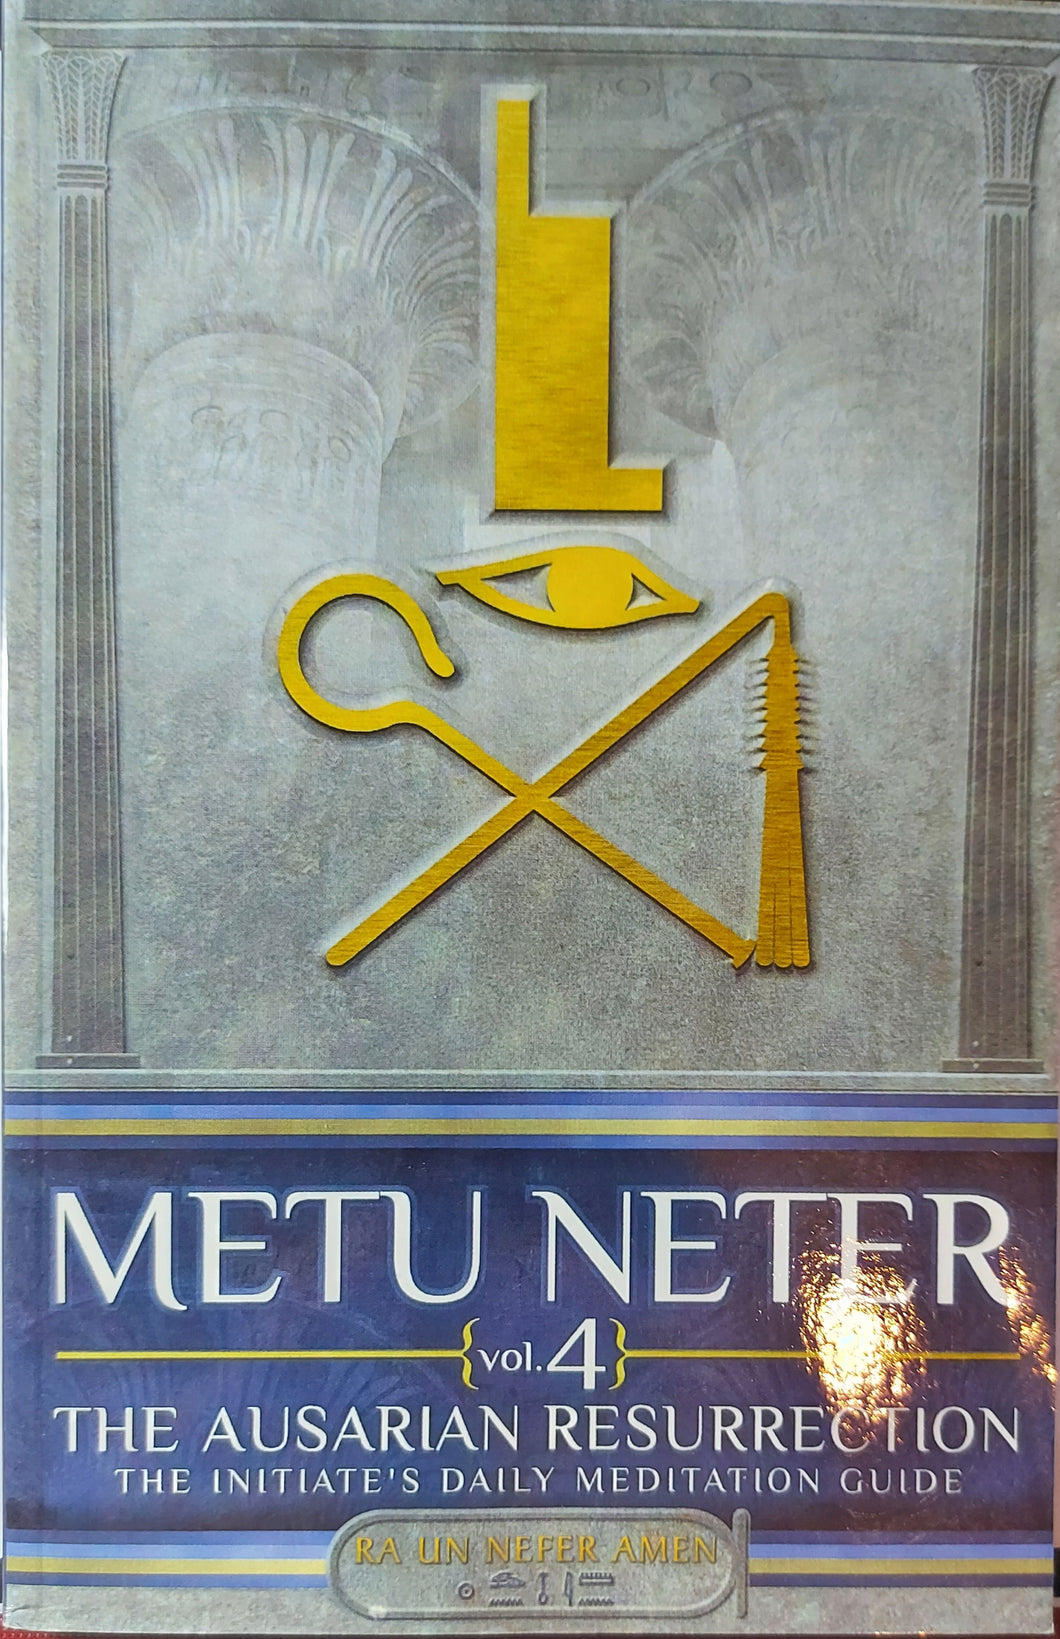 METU NETR Vol 4 - THE AUSATIAN RUSURRECTION - THE INITIATES'S DAILY MEDITATION GUIDE BY RA UN NEFER